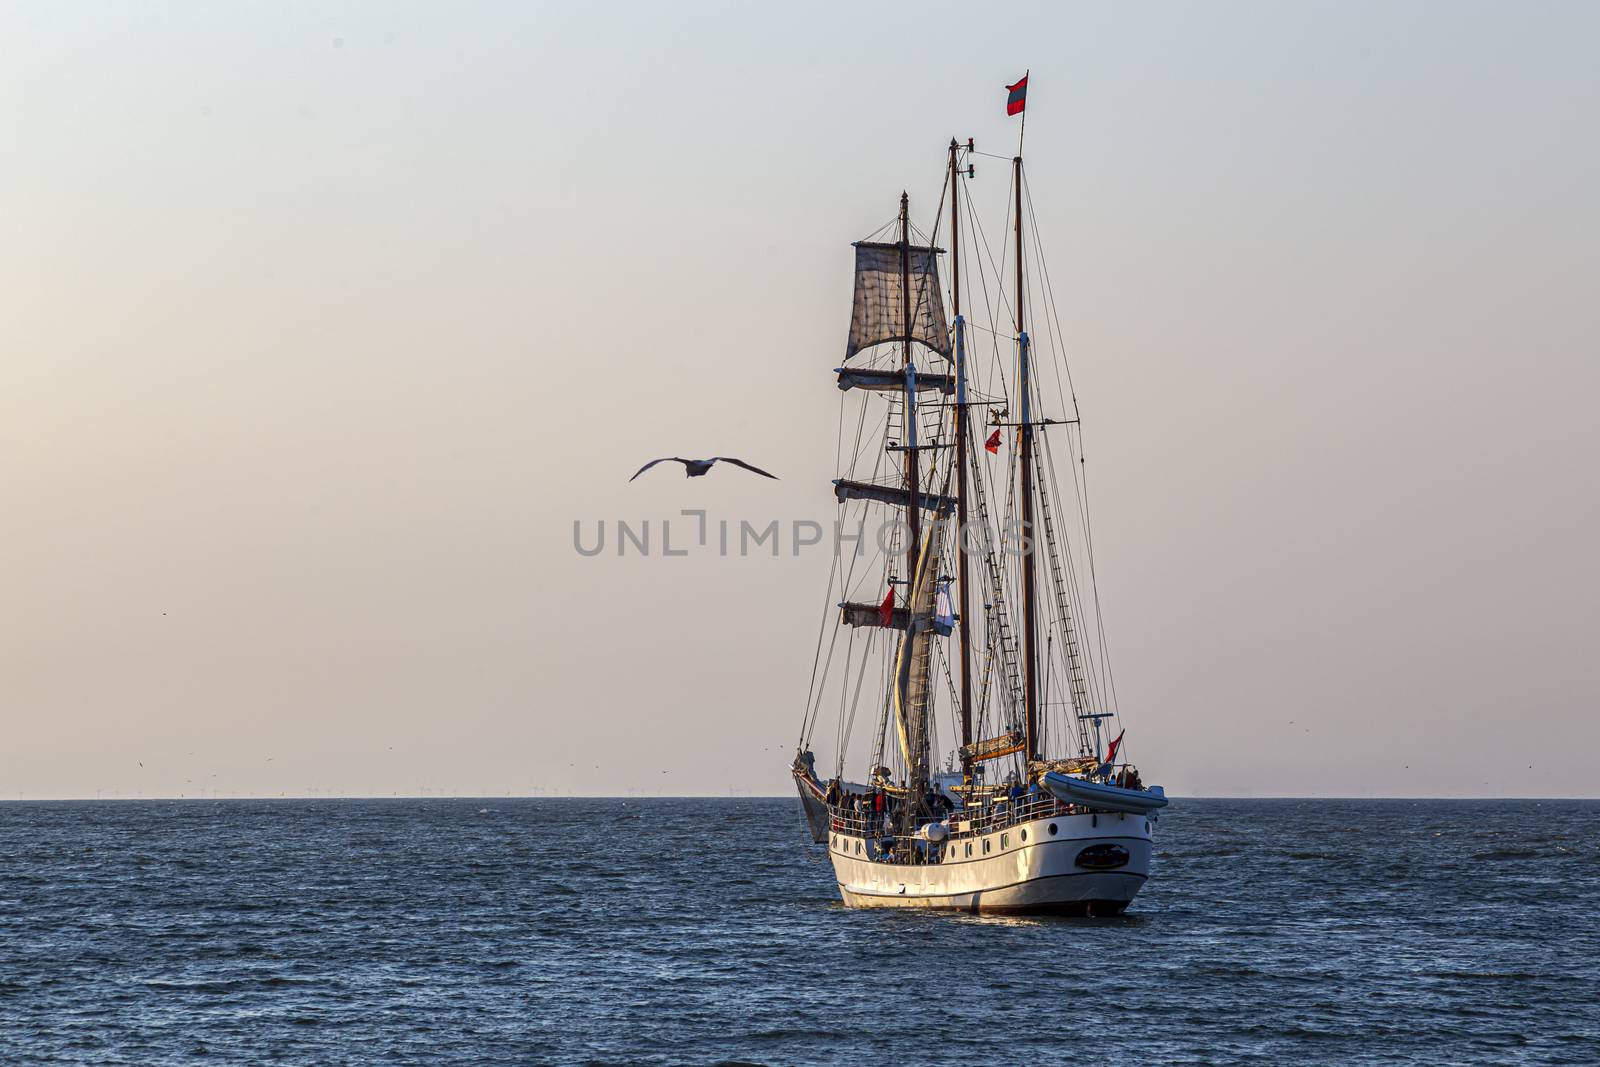 A seagull flying beside an antique tall ship, vessel leaving the harbor of The Hague, Scheveningen under a warm sunset and golden sky by ankorlight